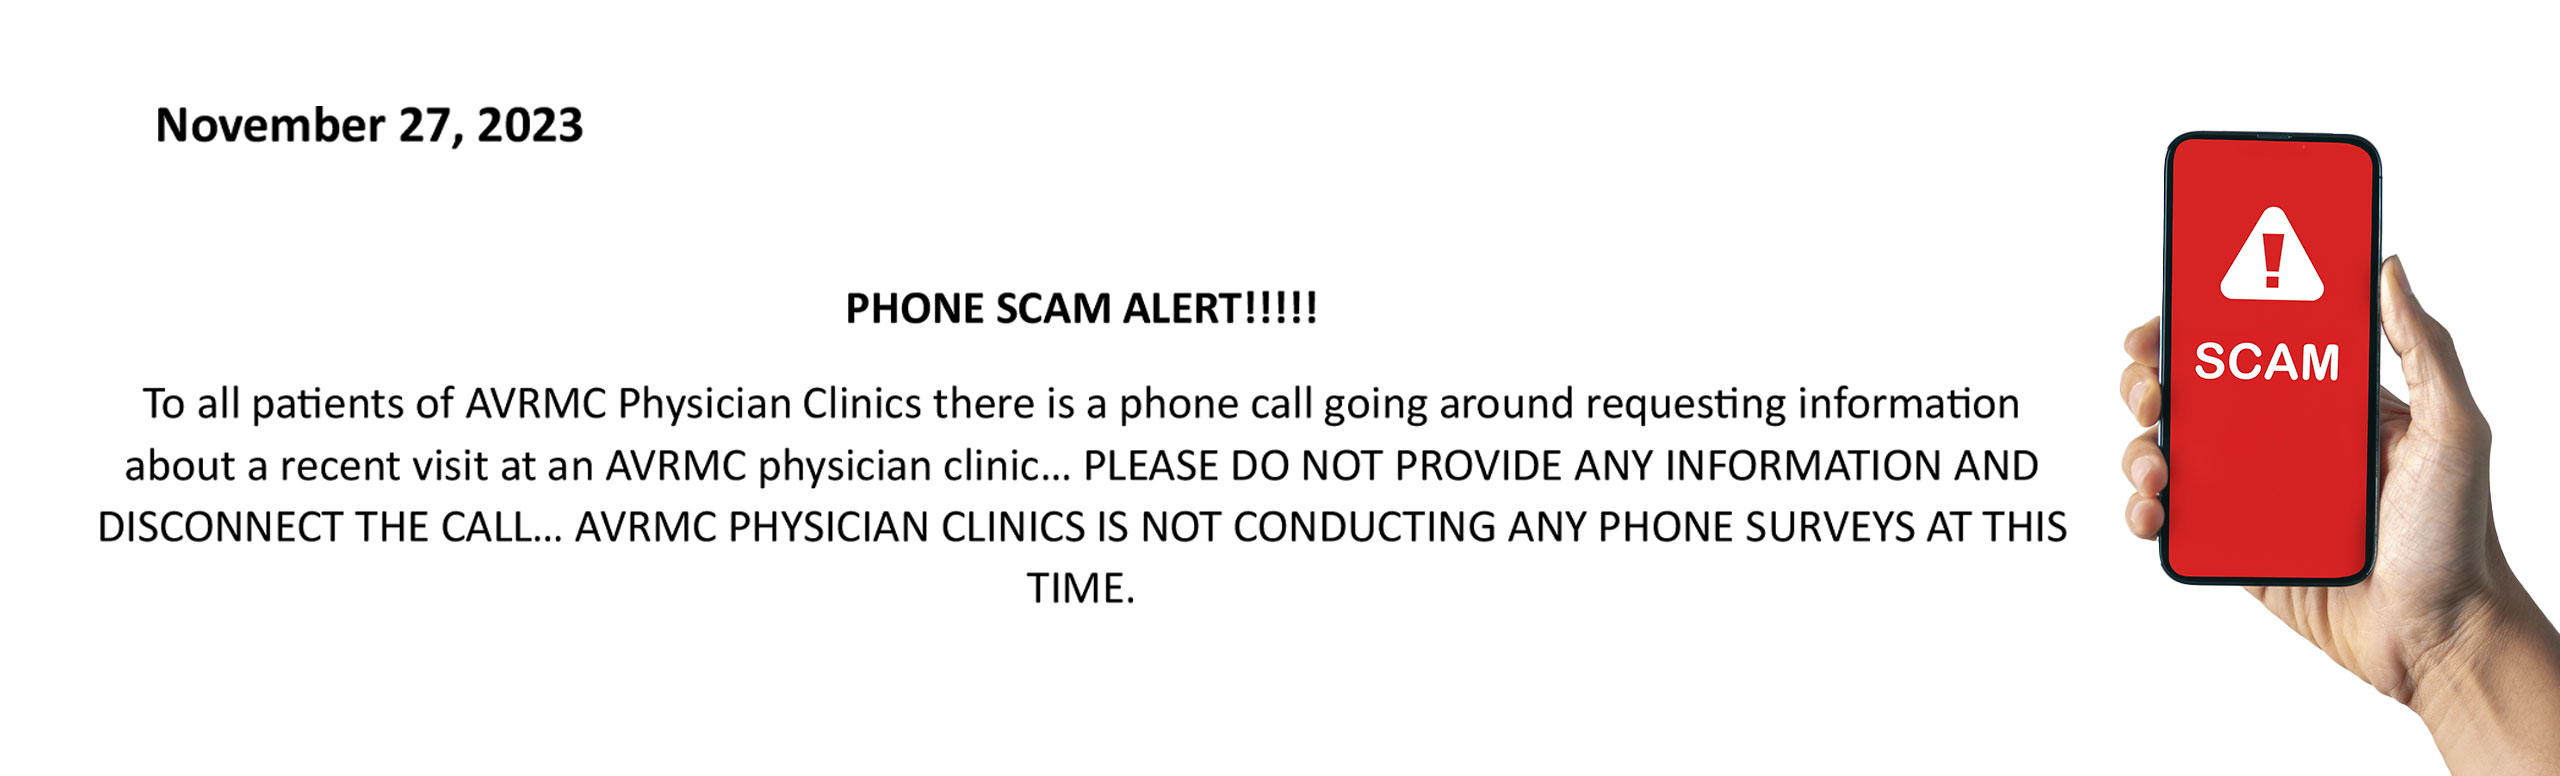 Phone Scam Alert!

To all patients of AVRMC Physician Clinics there is a phone call going around requesting information about a revent visit at an AVRMC physician clinic.  Please do not provide any information and disconnect the call.